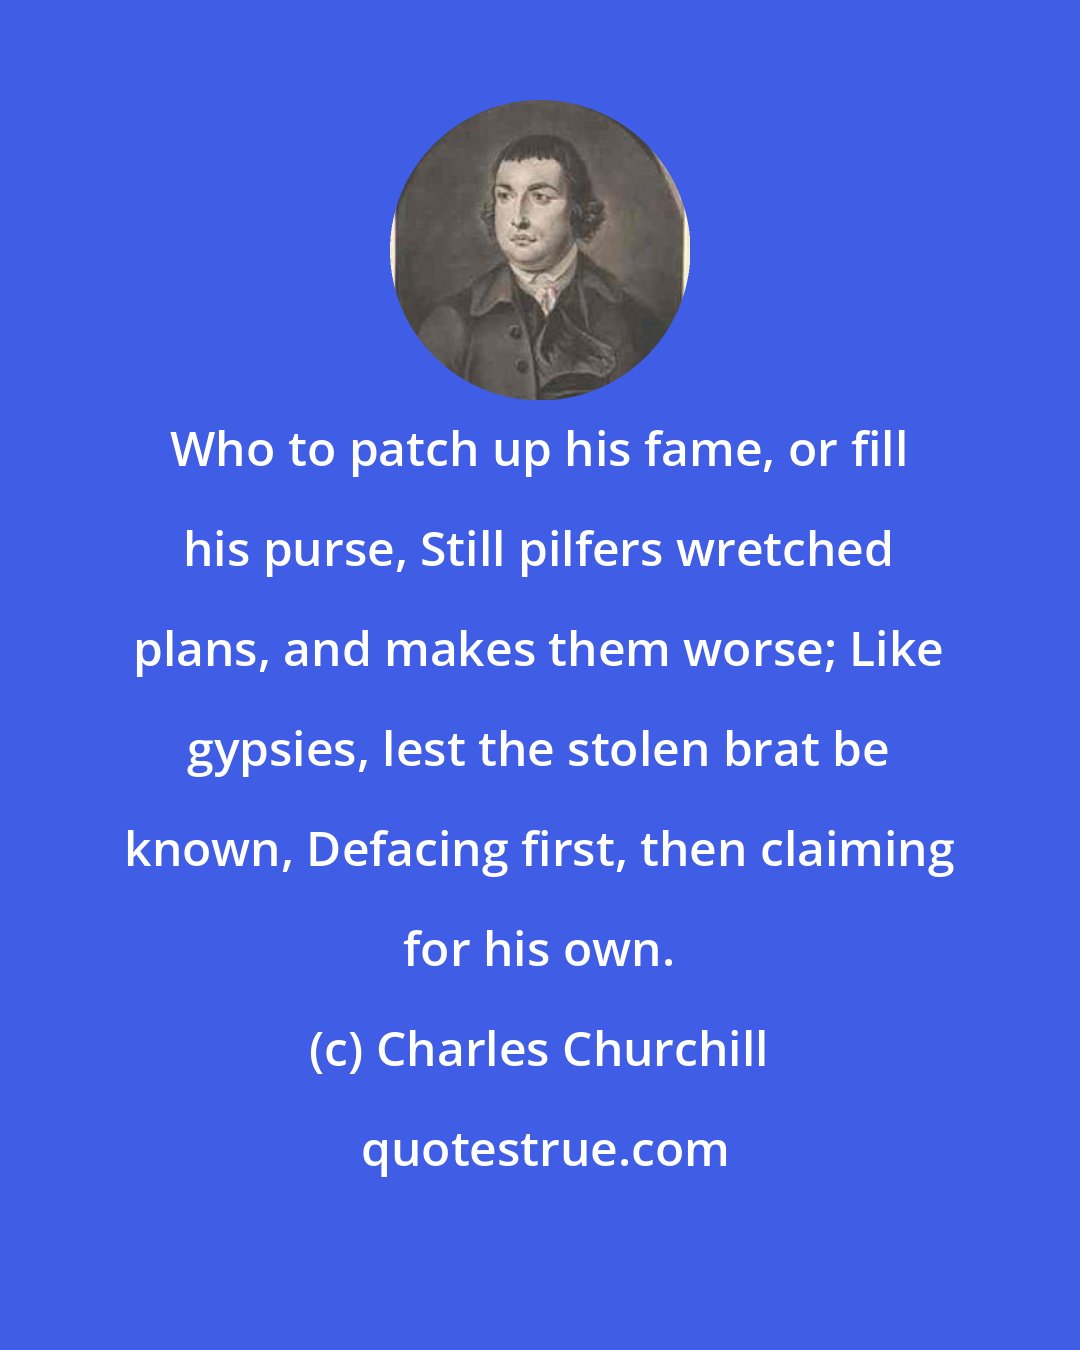 Charles Churchill: Who to patch up his fame, or fill his purse, Still pilfers wretched plans, and makes them worse; Like gypsies, lest the stolen brat be known, Defacing first, then claiming for his own.